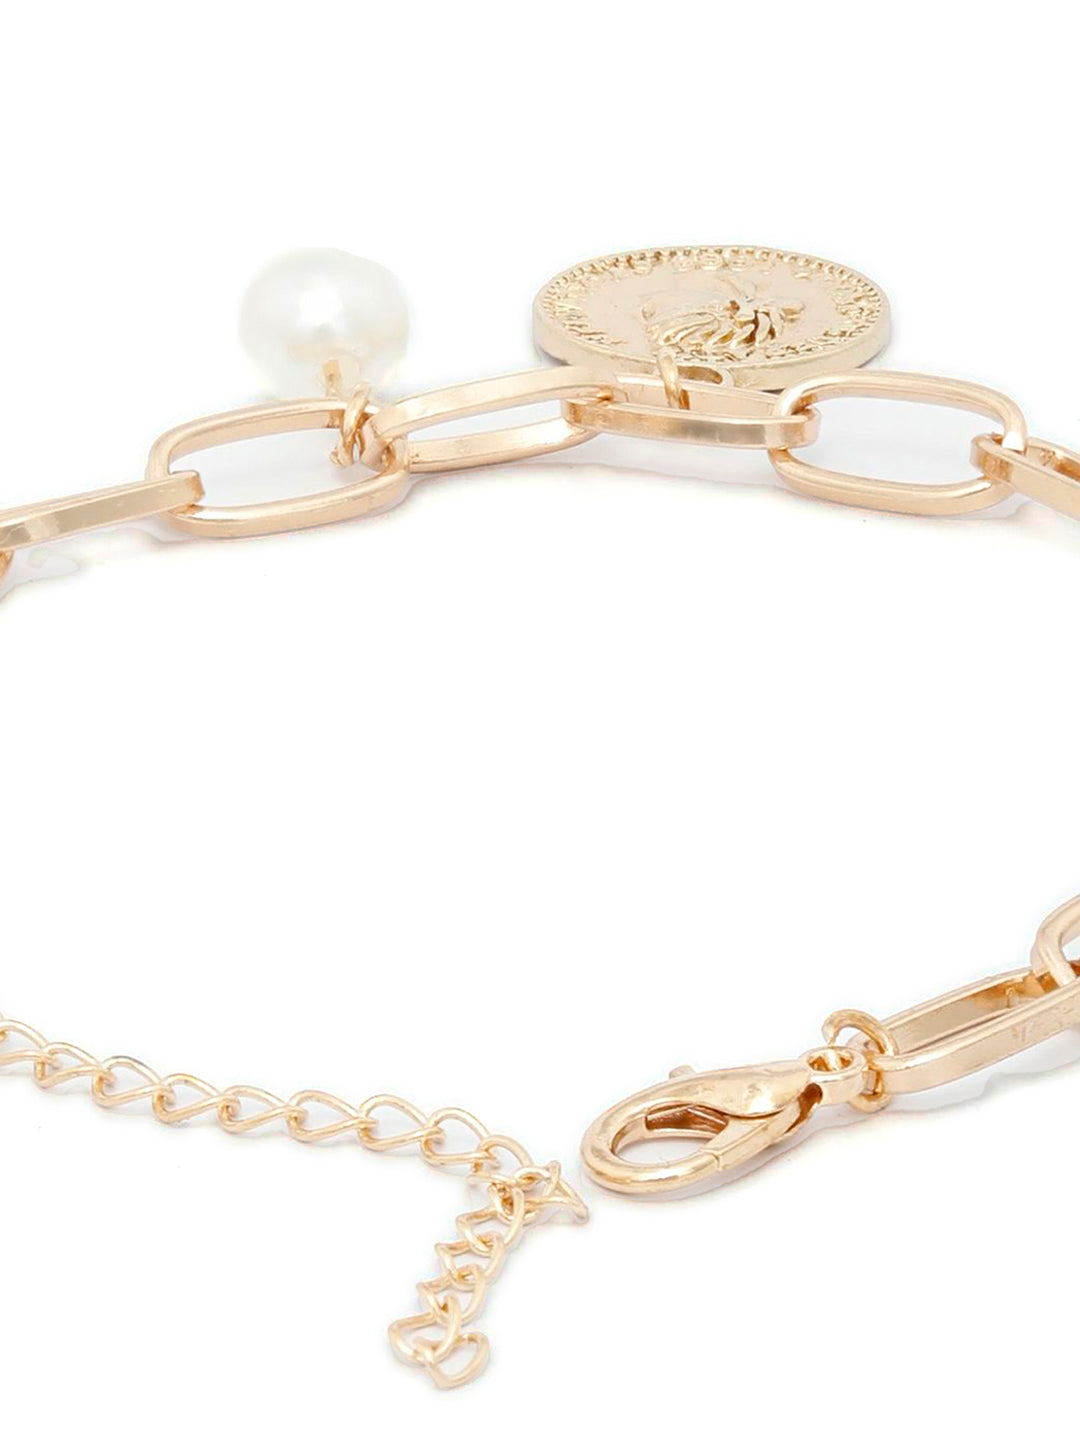 White Pearls Rose Gold Plated Coin Link Bracelet